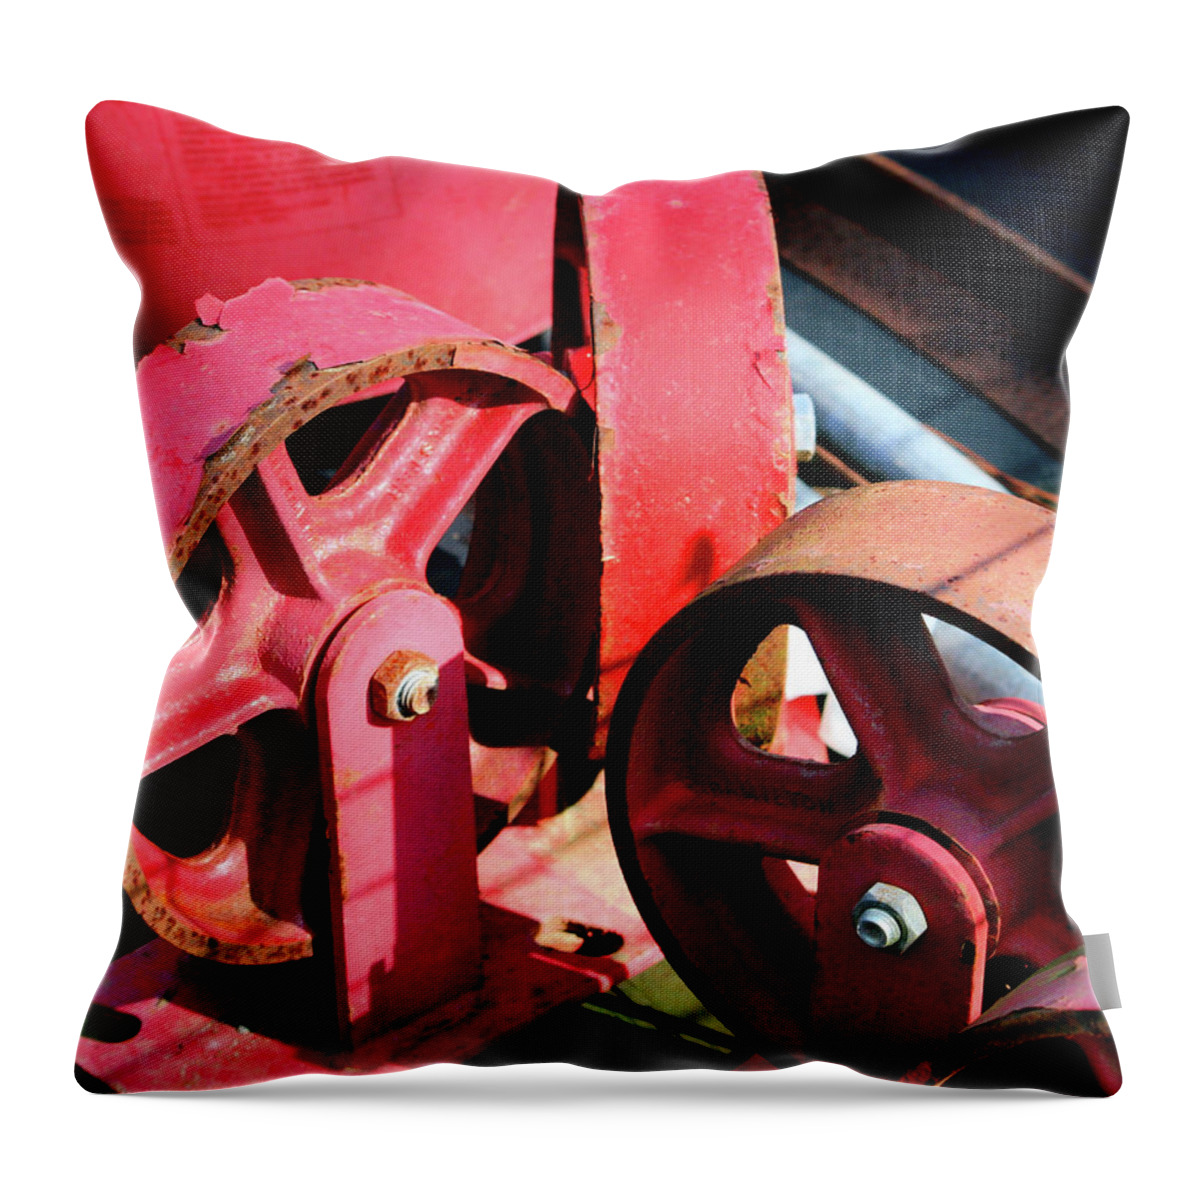 Red Throw Pillow featuring the photograph Wheels by Cathy Harper